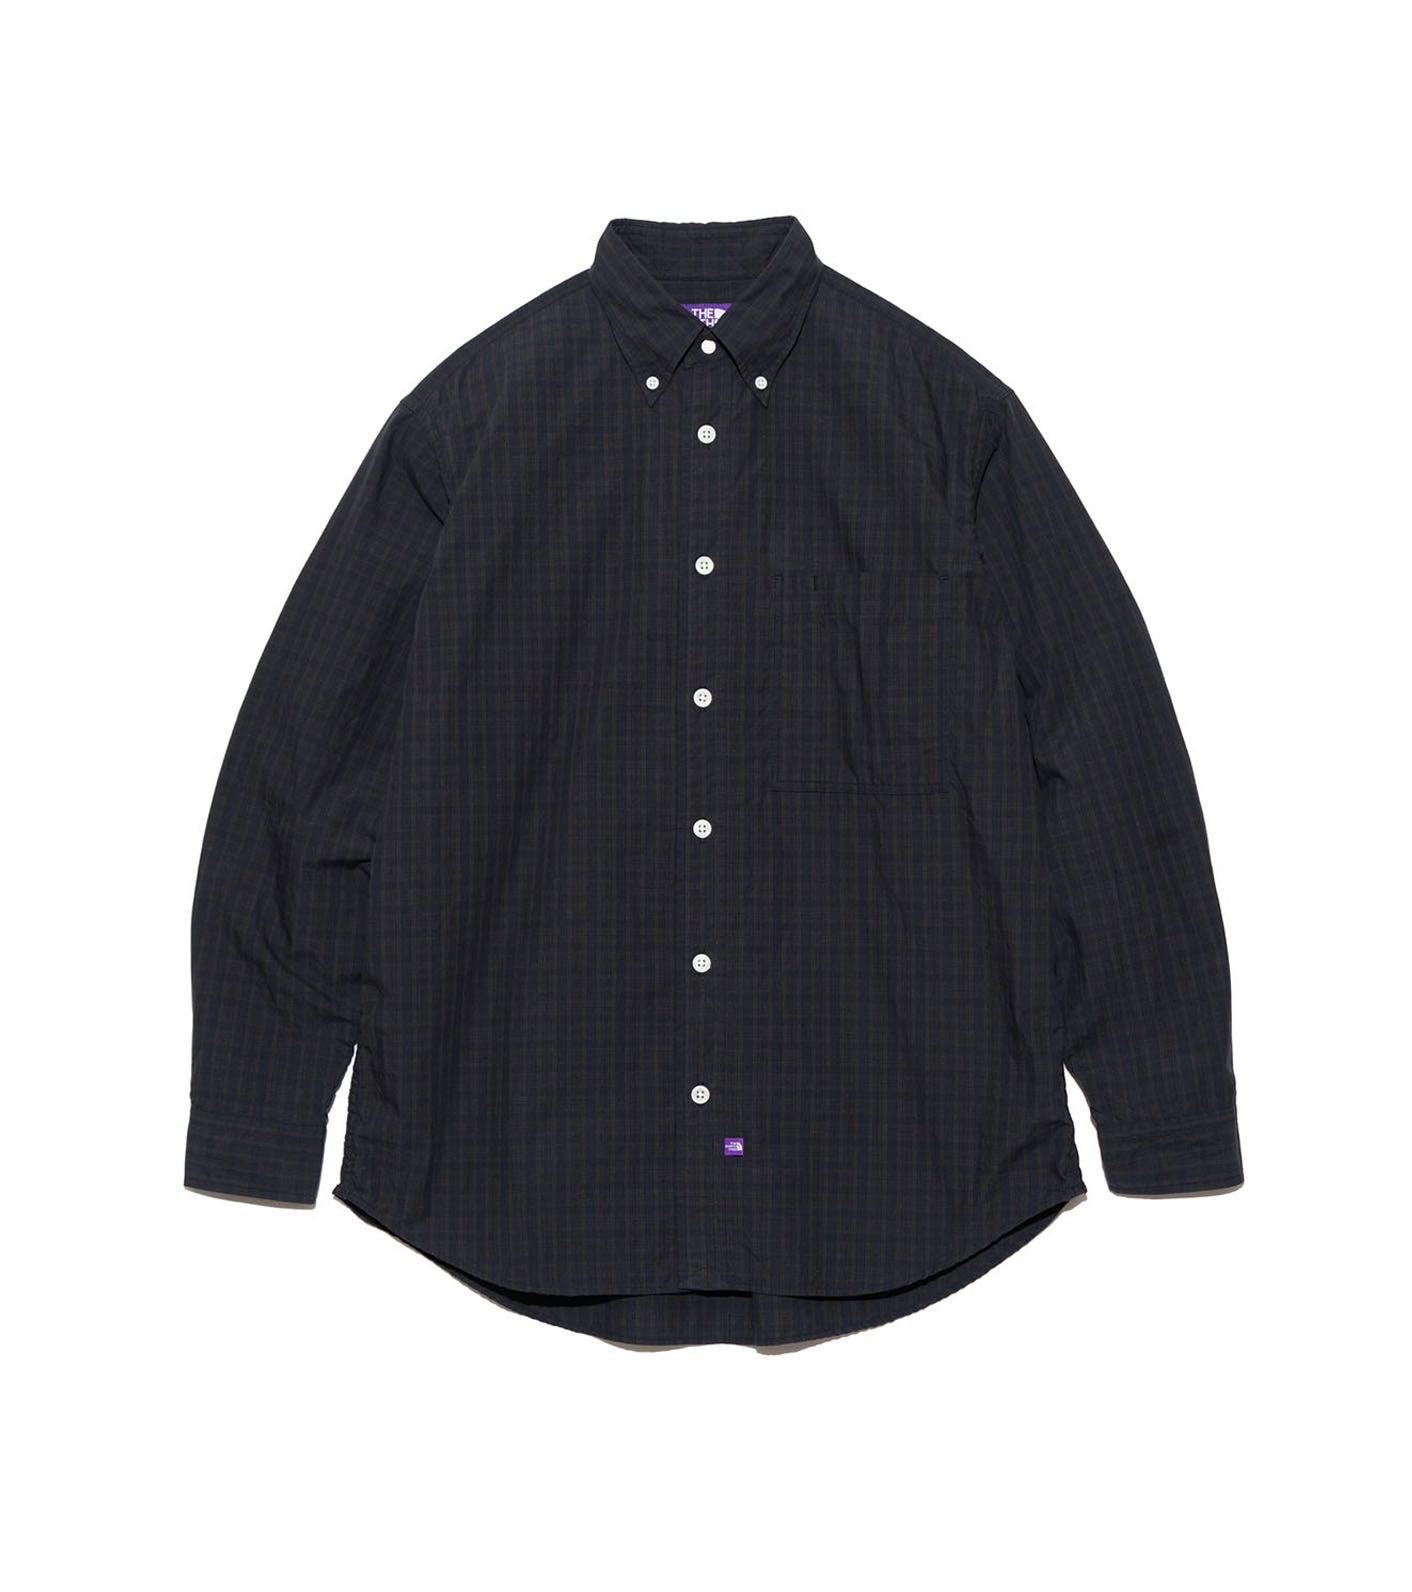 THE NORTH FACE PURPLE LABEL Button Down Plaid Field Shirt